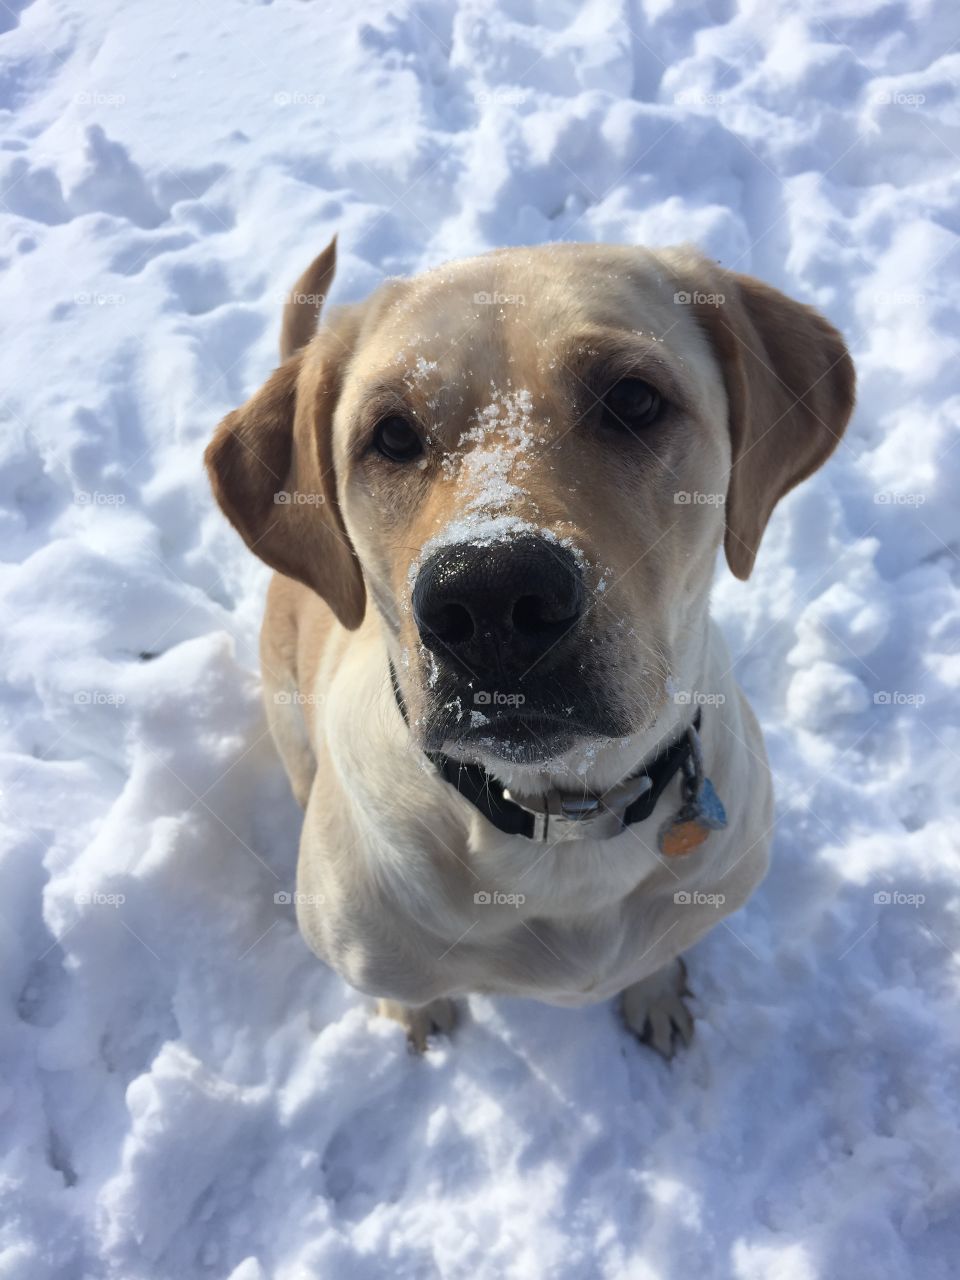 Yellow lab taking a break from playing in the snow.